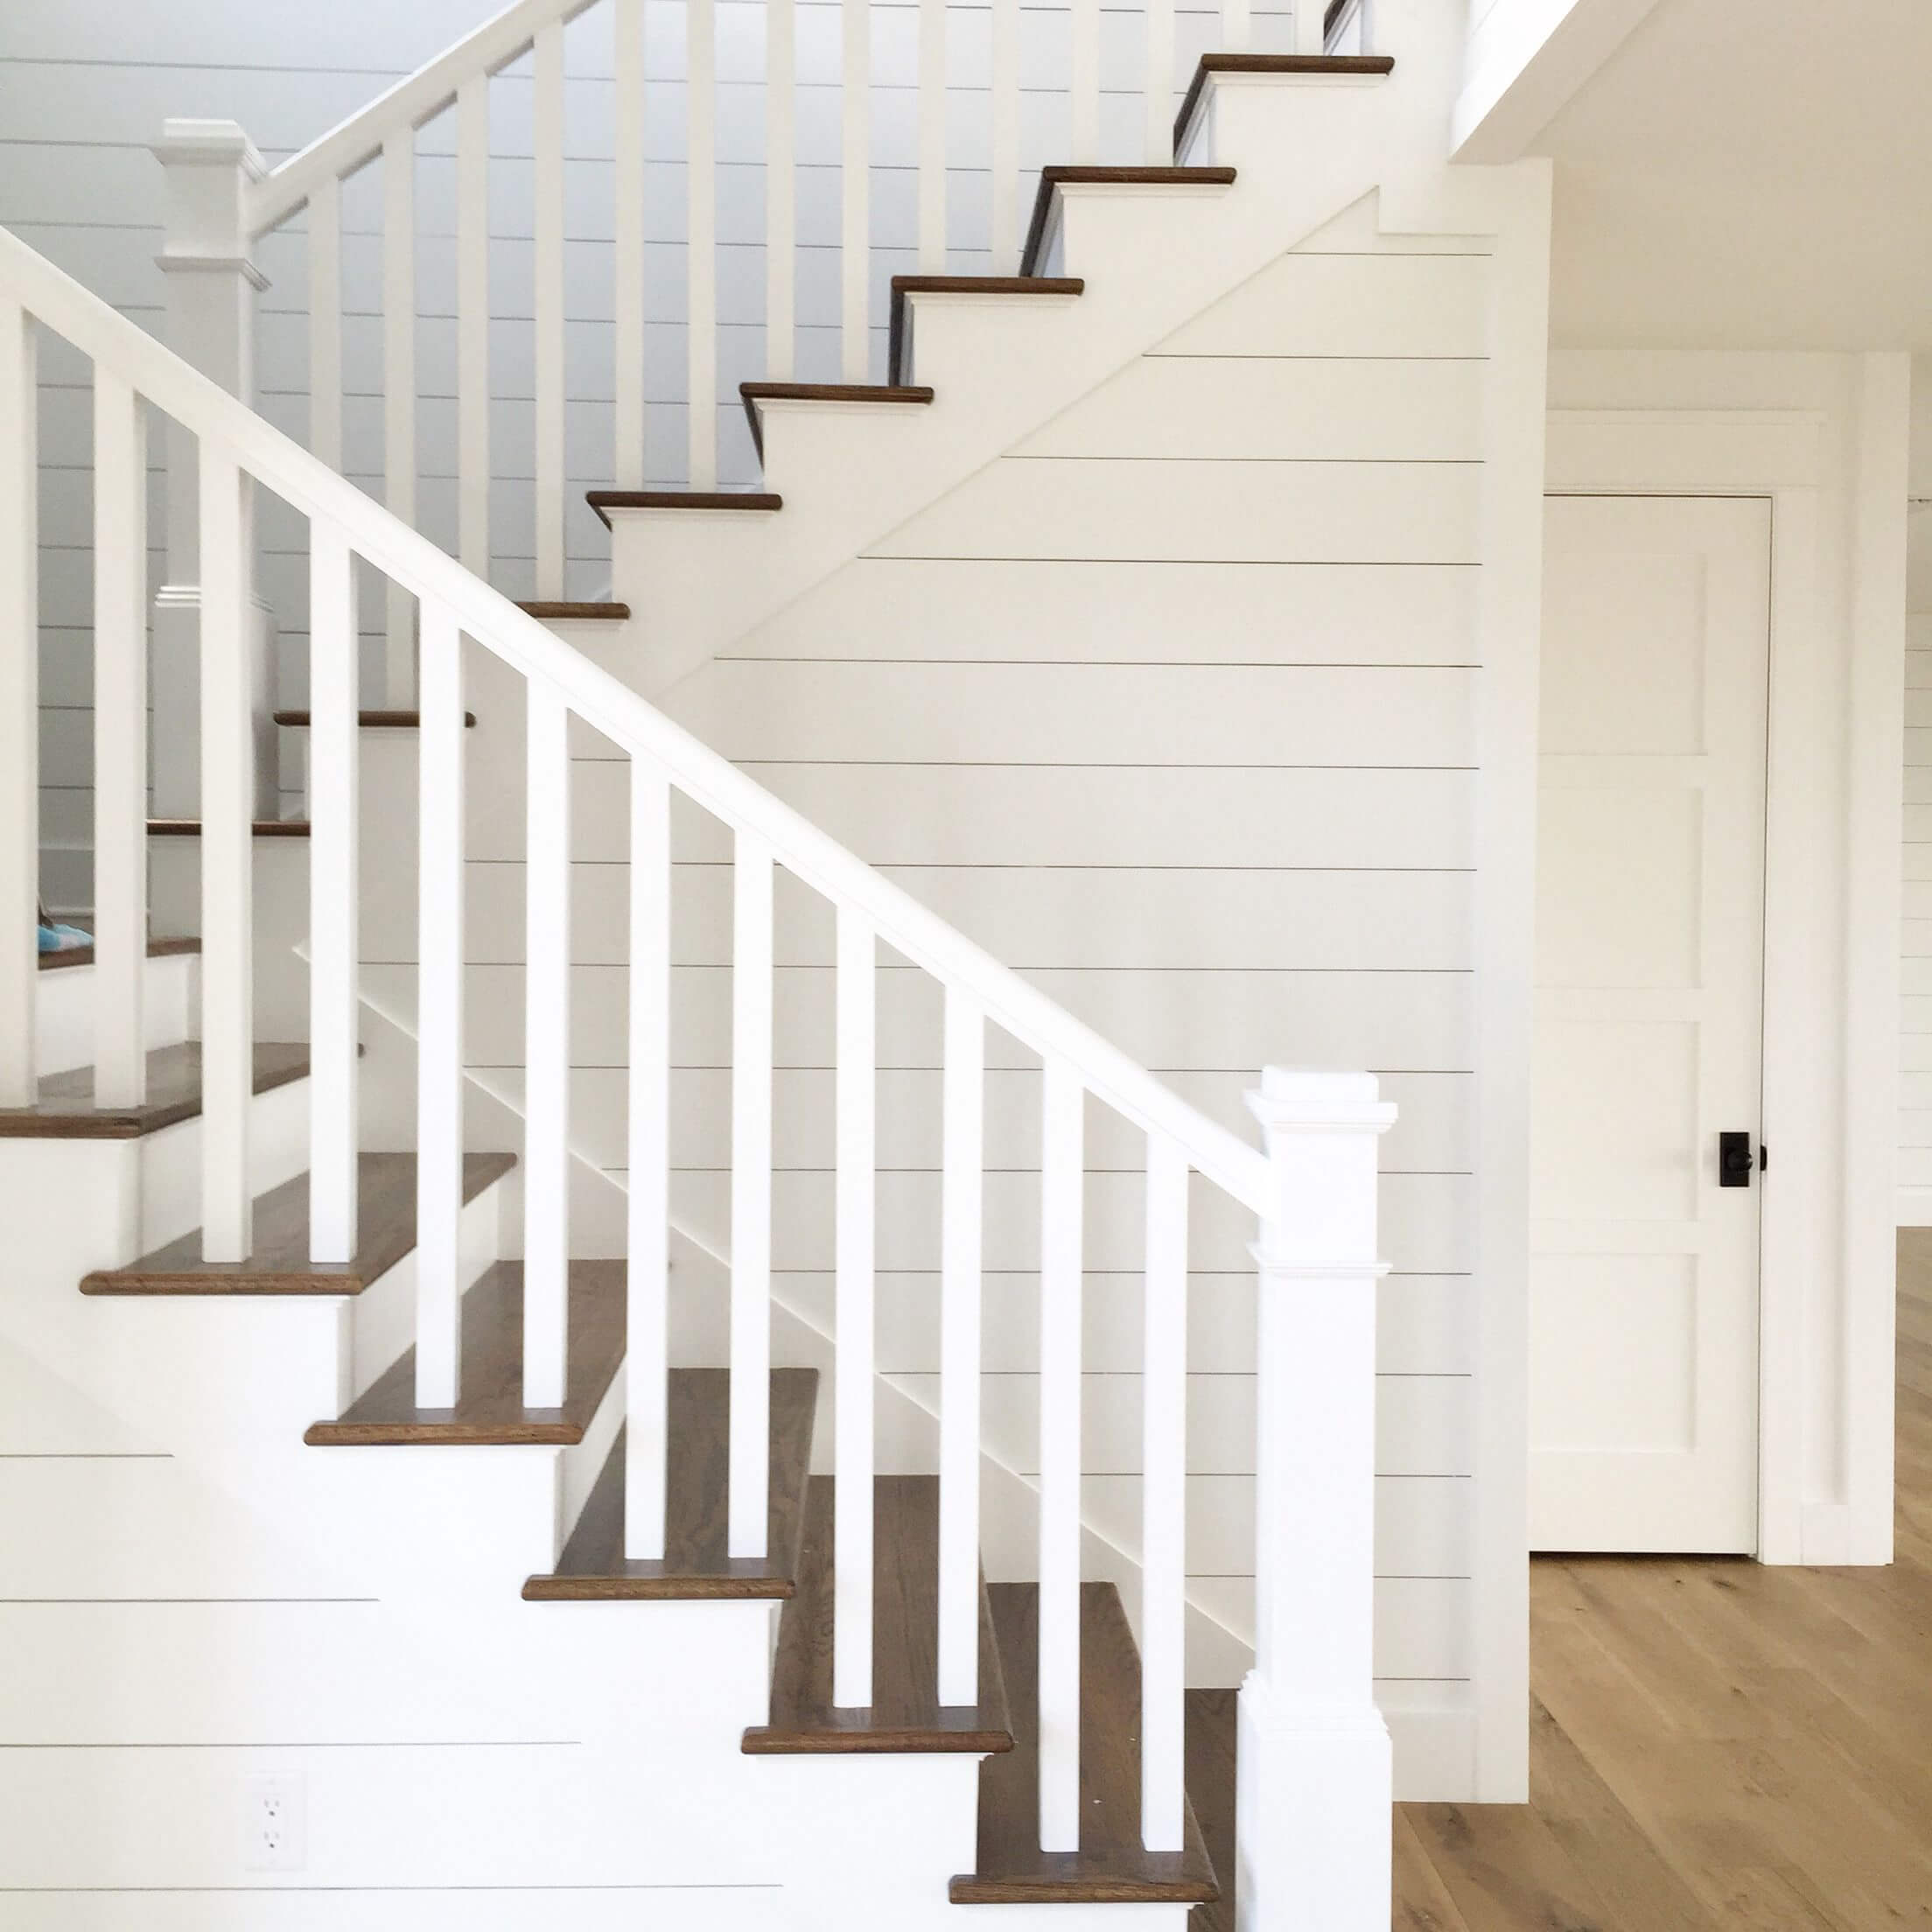 All white railing + staircases